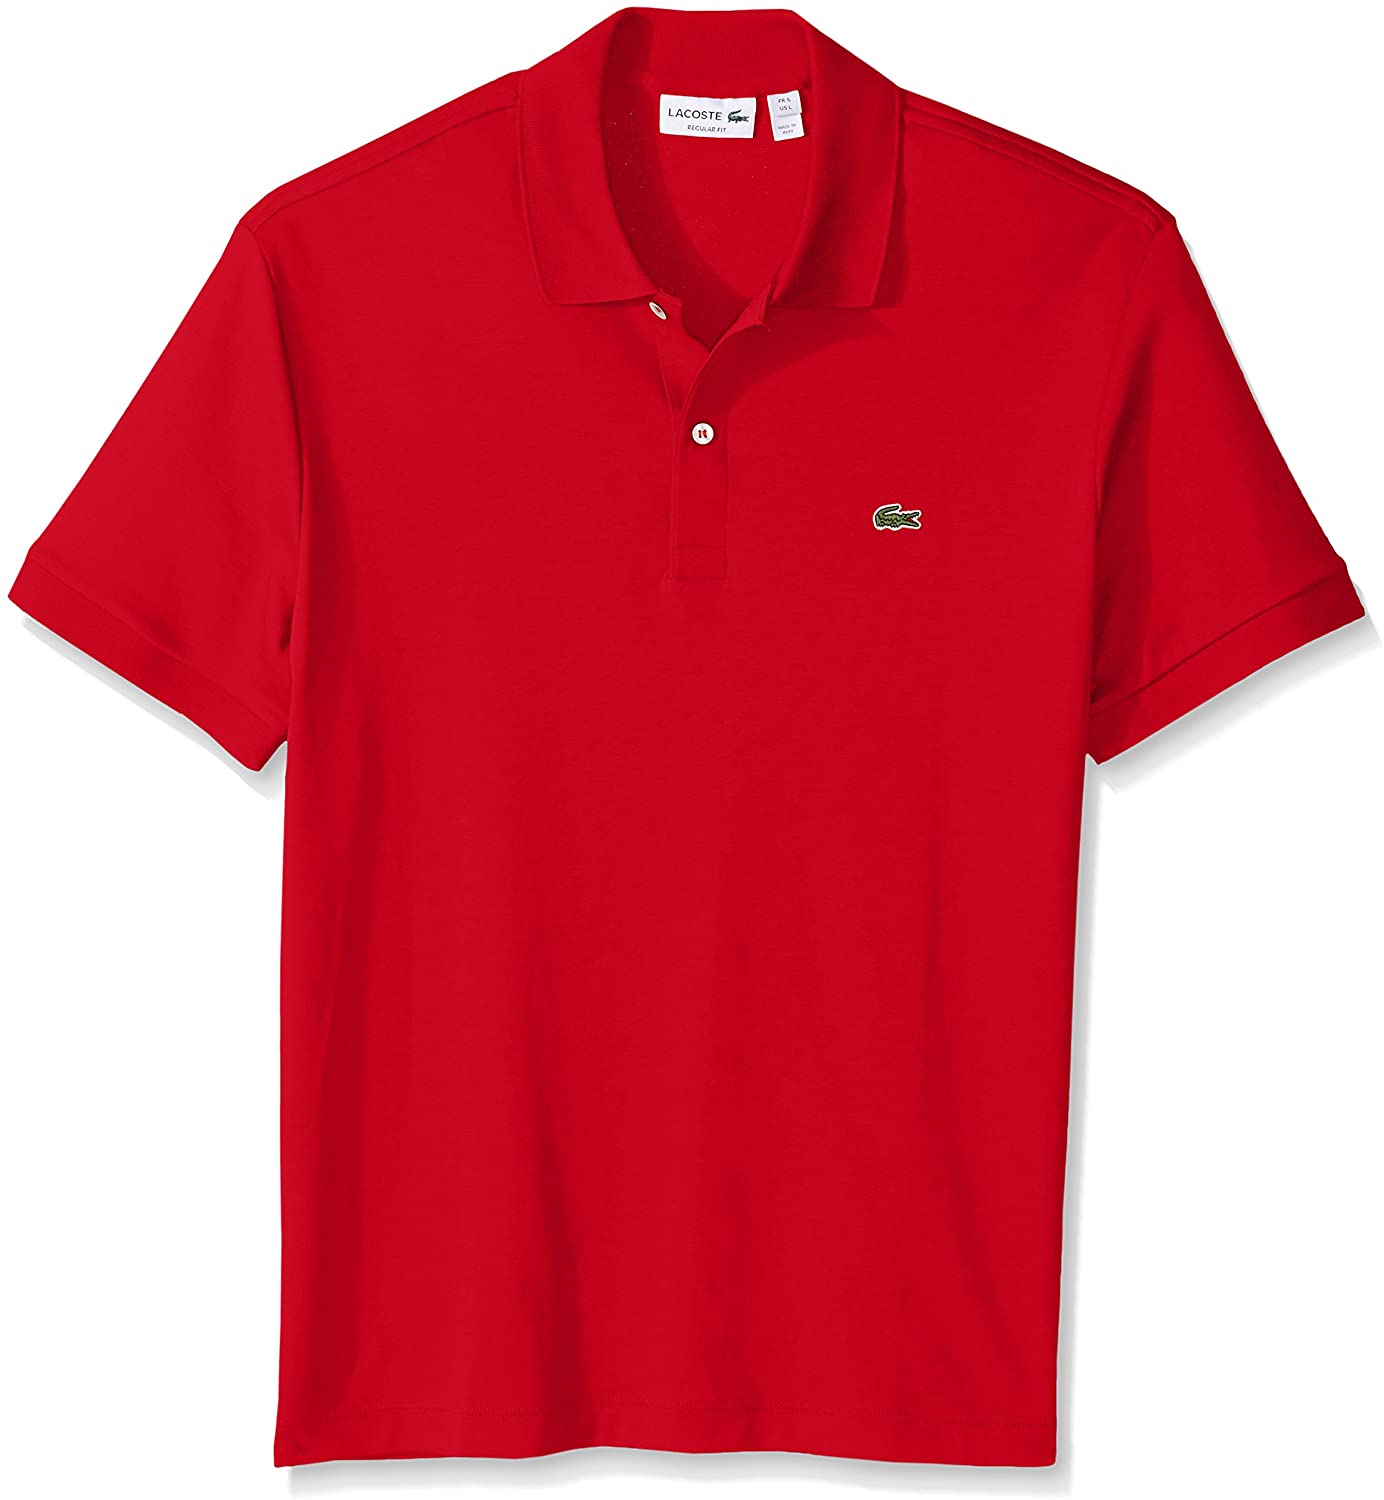 You Can Get Lacoste's Signature Polo at a Deep Discount Right Now, Courtesy  of Prime Day